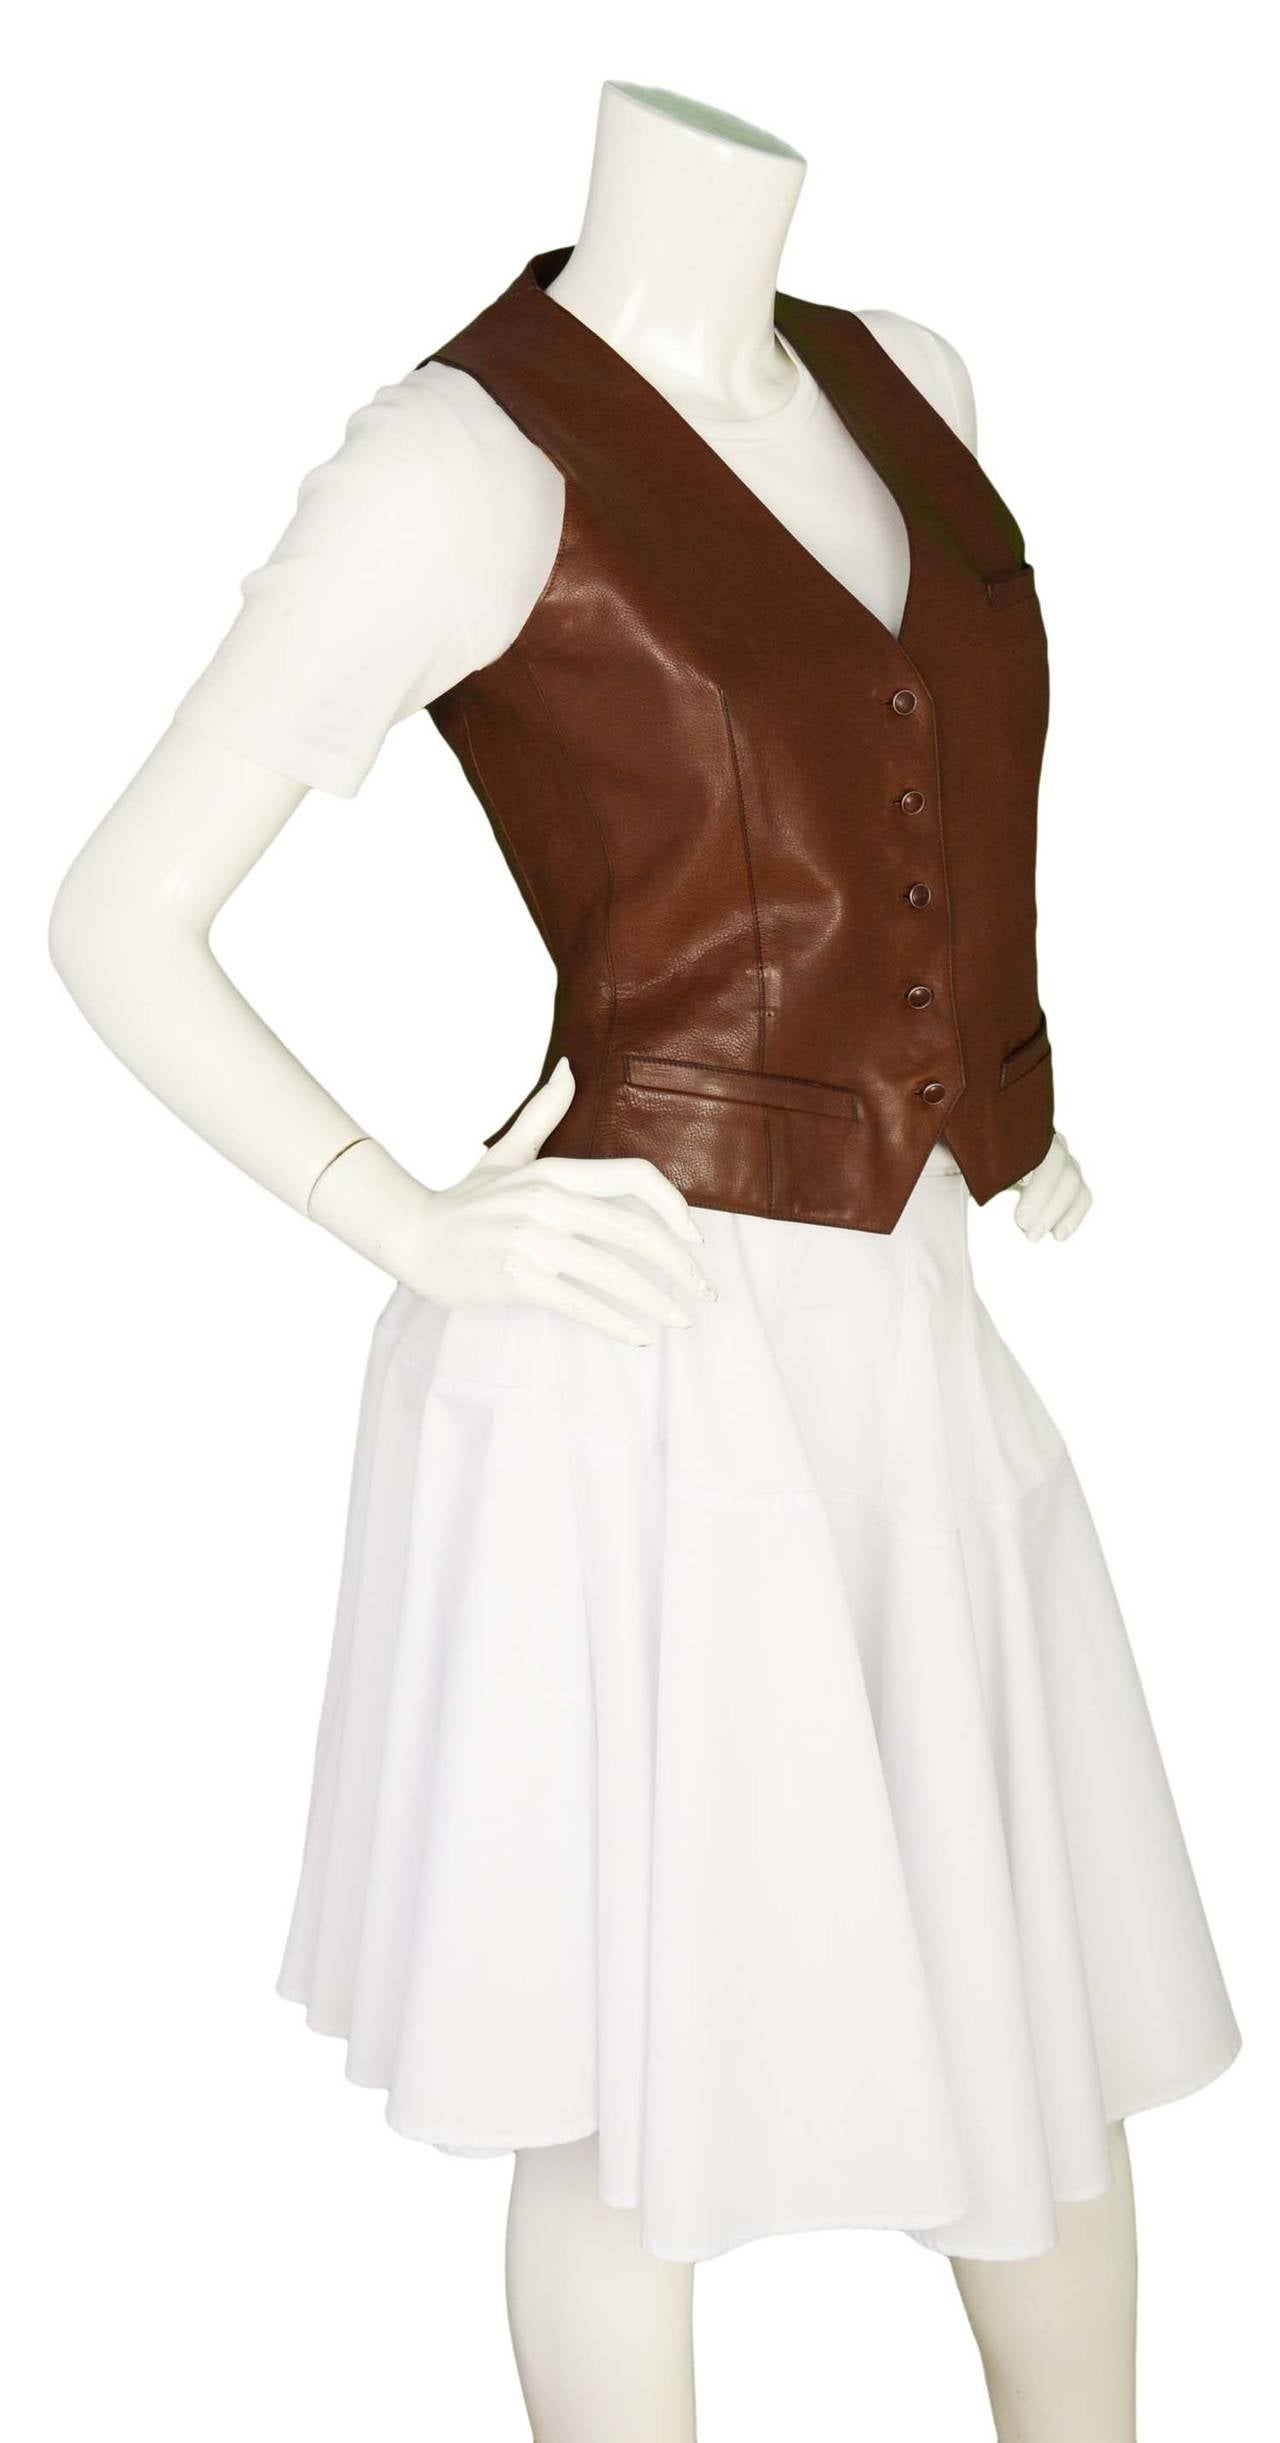 -c 21st Century
-made in France
-brown distressed leather, fabric lining
-three slit pockets
-five leather buttons
-back of vest has a slit on each side

Bust 34